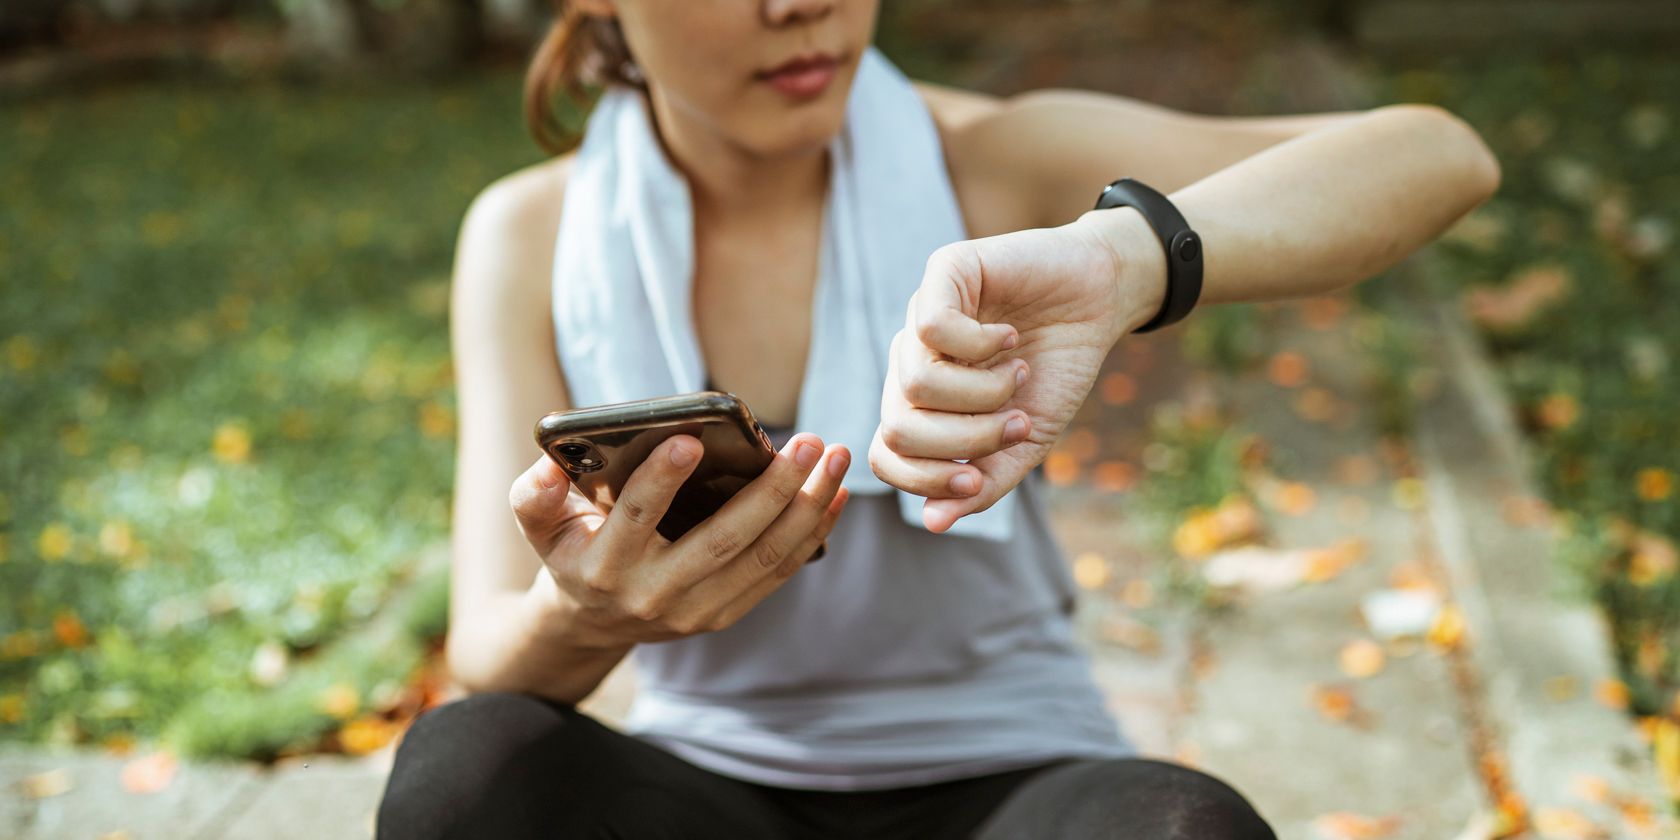 7 things people hate in fitness apps.